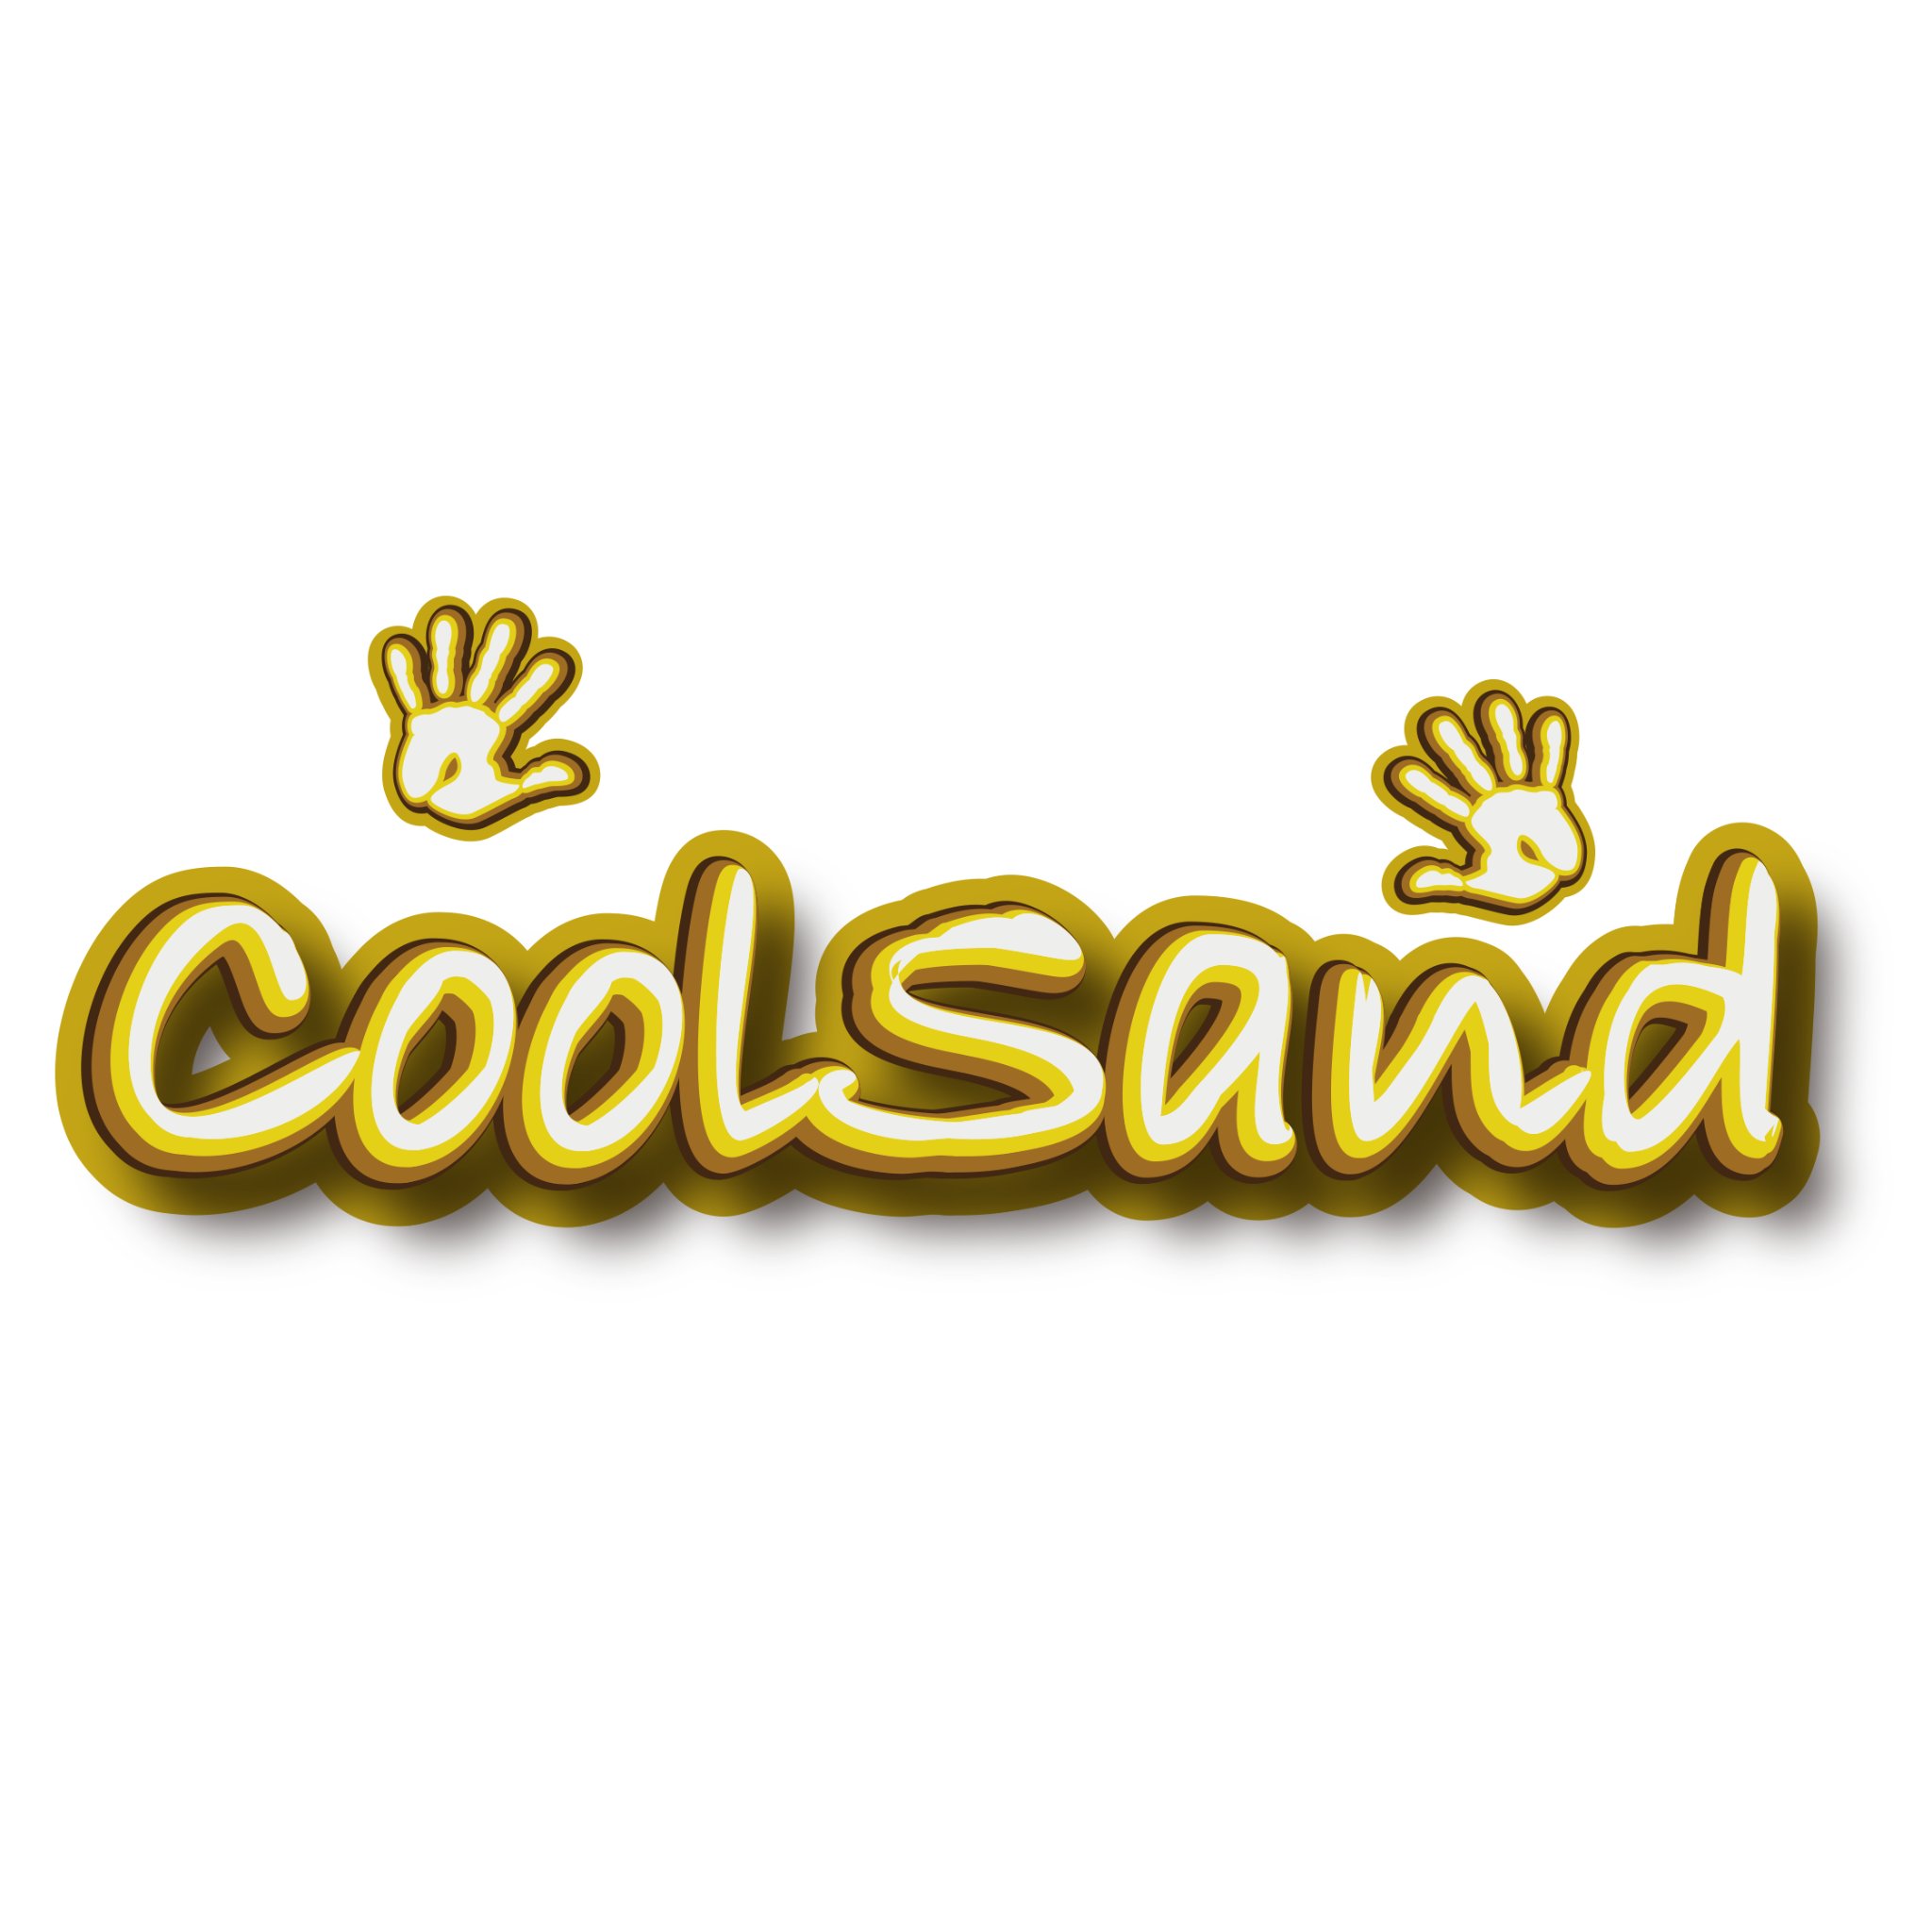 Have a blast, or simply relax with CoolSand! No matter what you do —mold it, cut it, shape it—CoolSand promotes creativity & relaxation. SHOP below